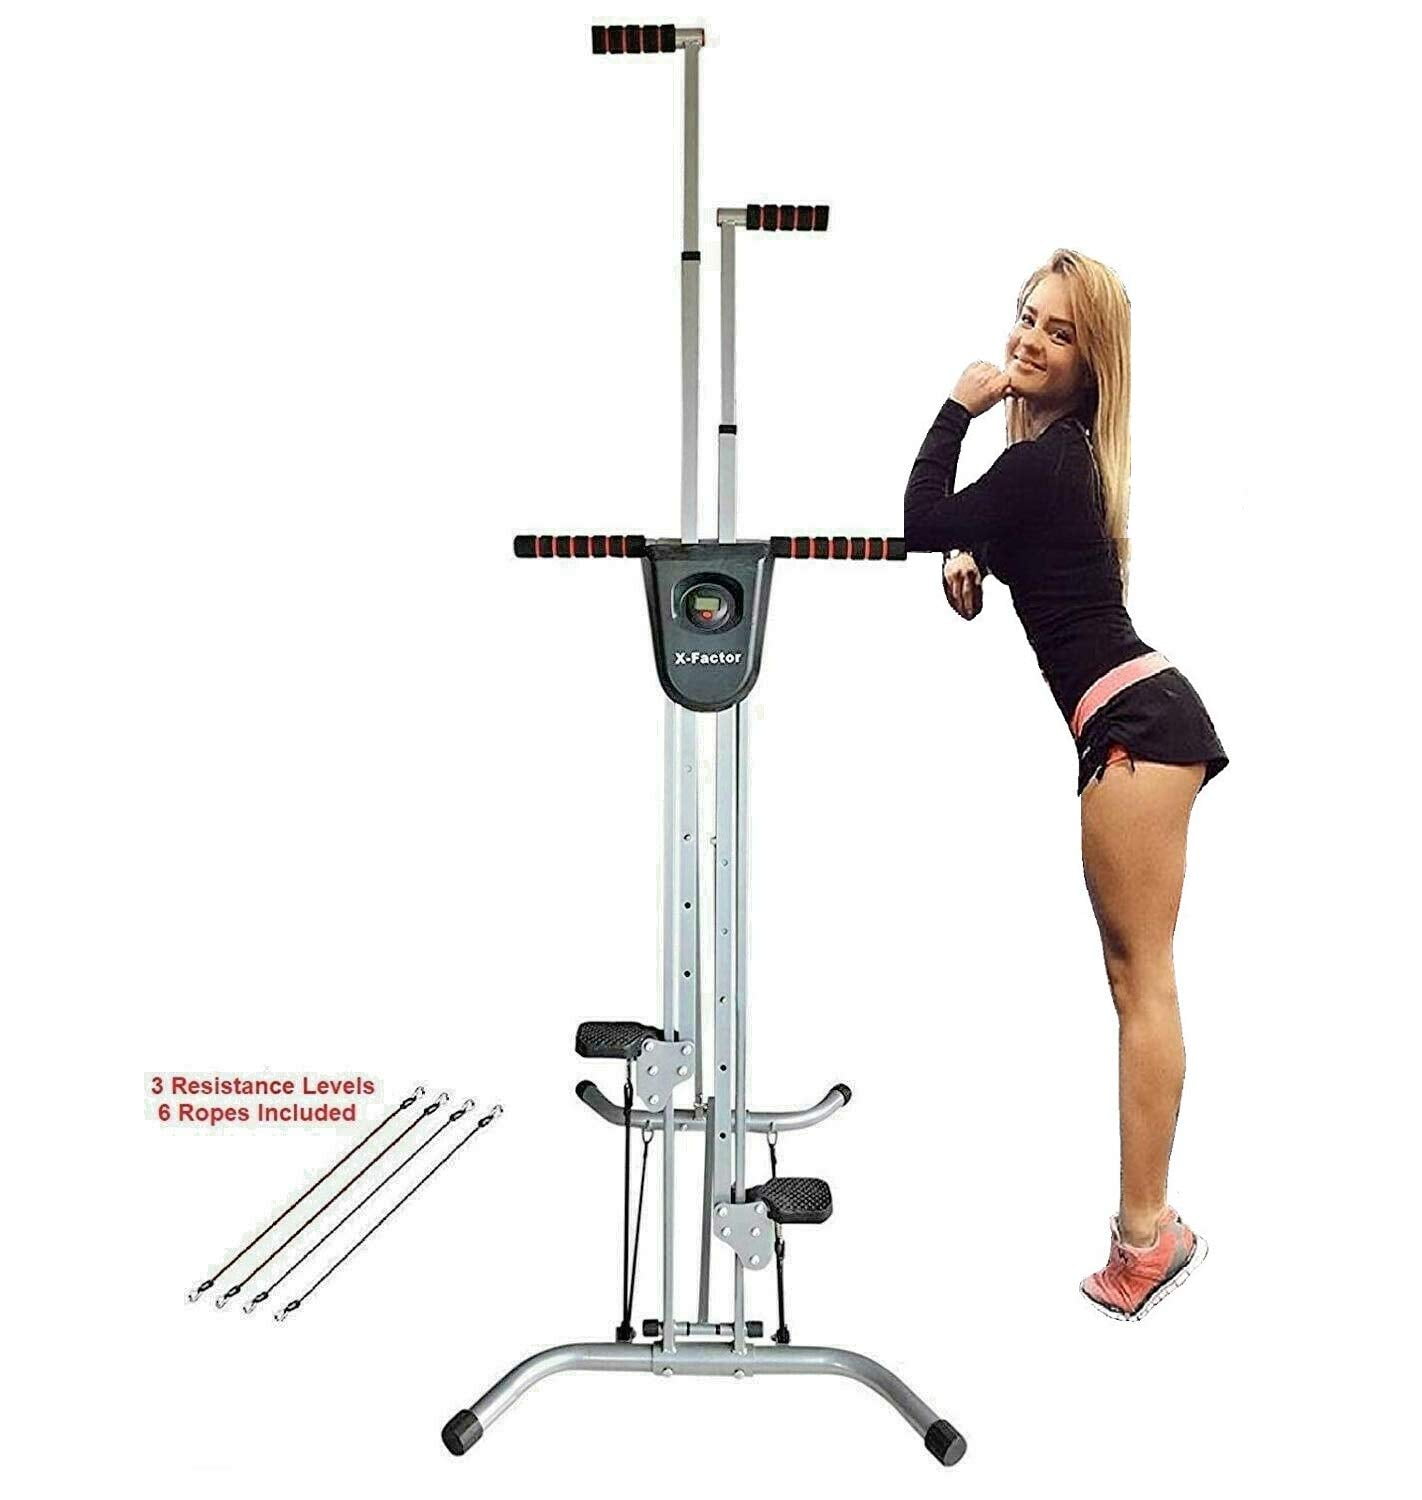 Vertical Climber Machine for Home Gym Stepper Exercise Body Workout Equipment 